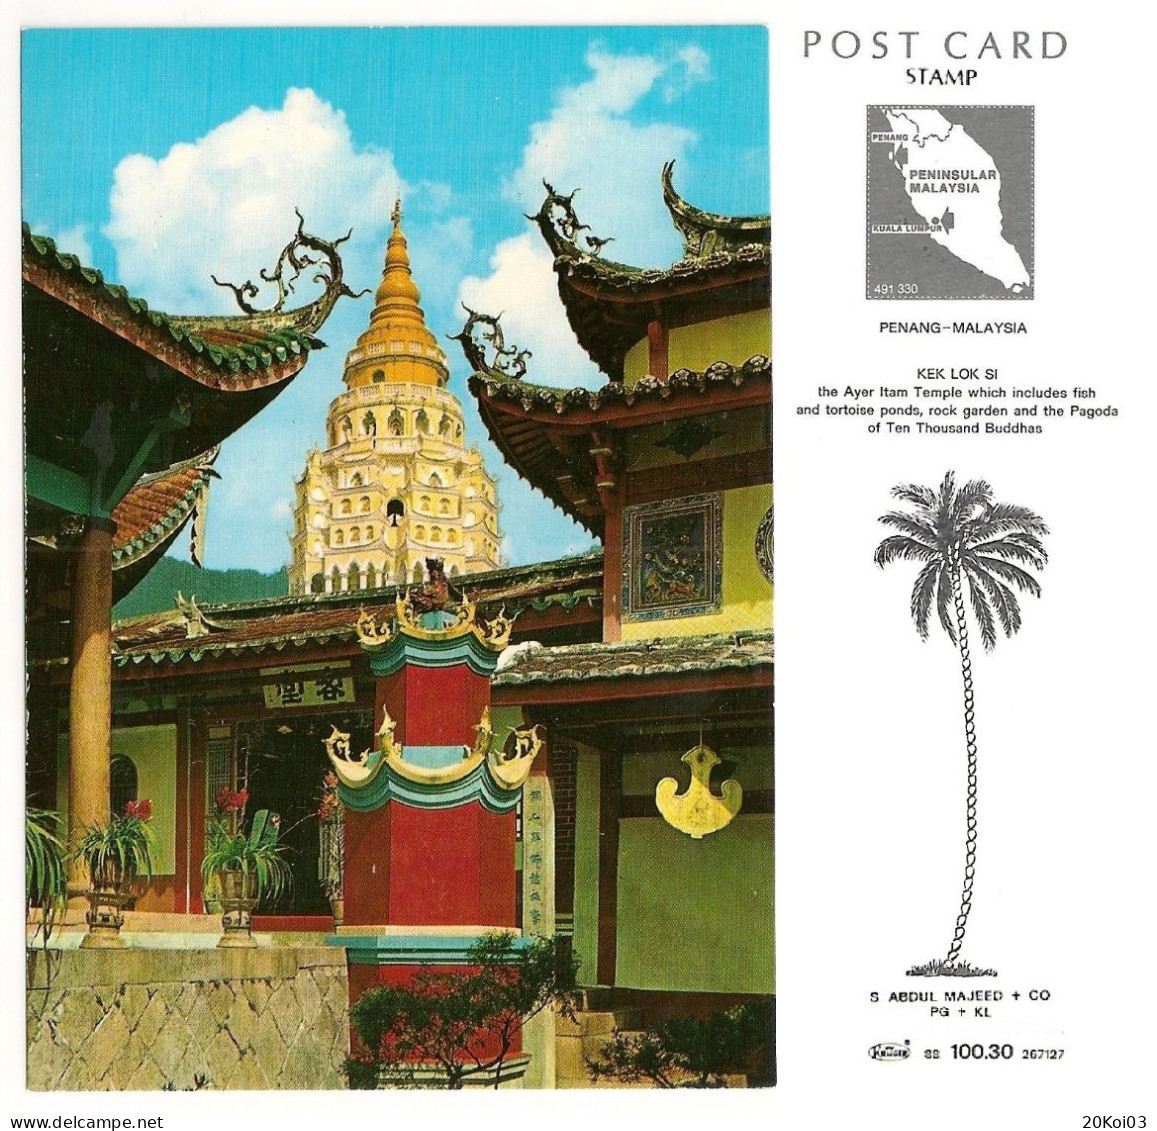 Malaysia Penang KEK LOK SI, Ayer Itam Temple, +/-1975's_UNC SUP_Kruger 88_100.30_S Abdul Majeed+CO_PG+KL_CPSM_cpc - Malaysia